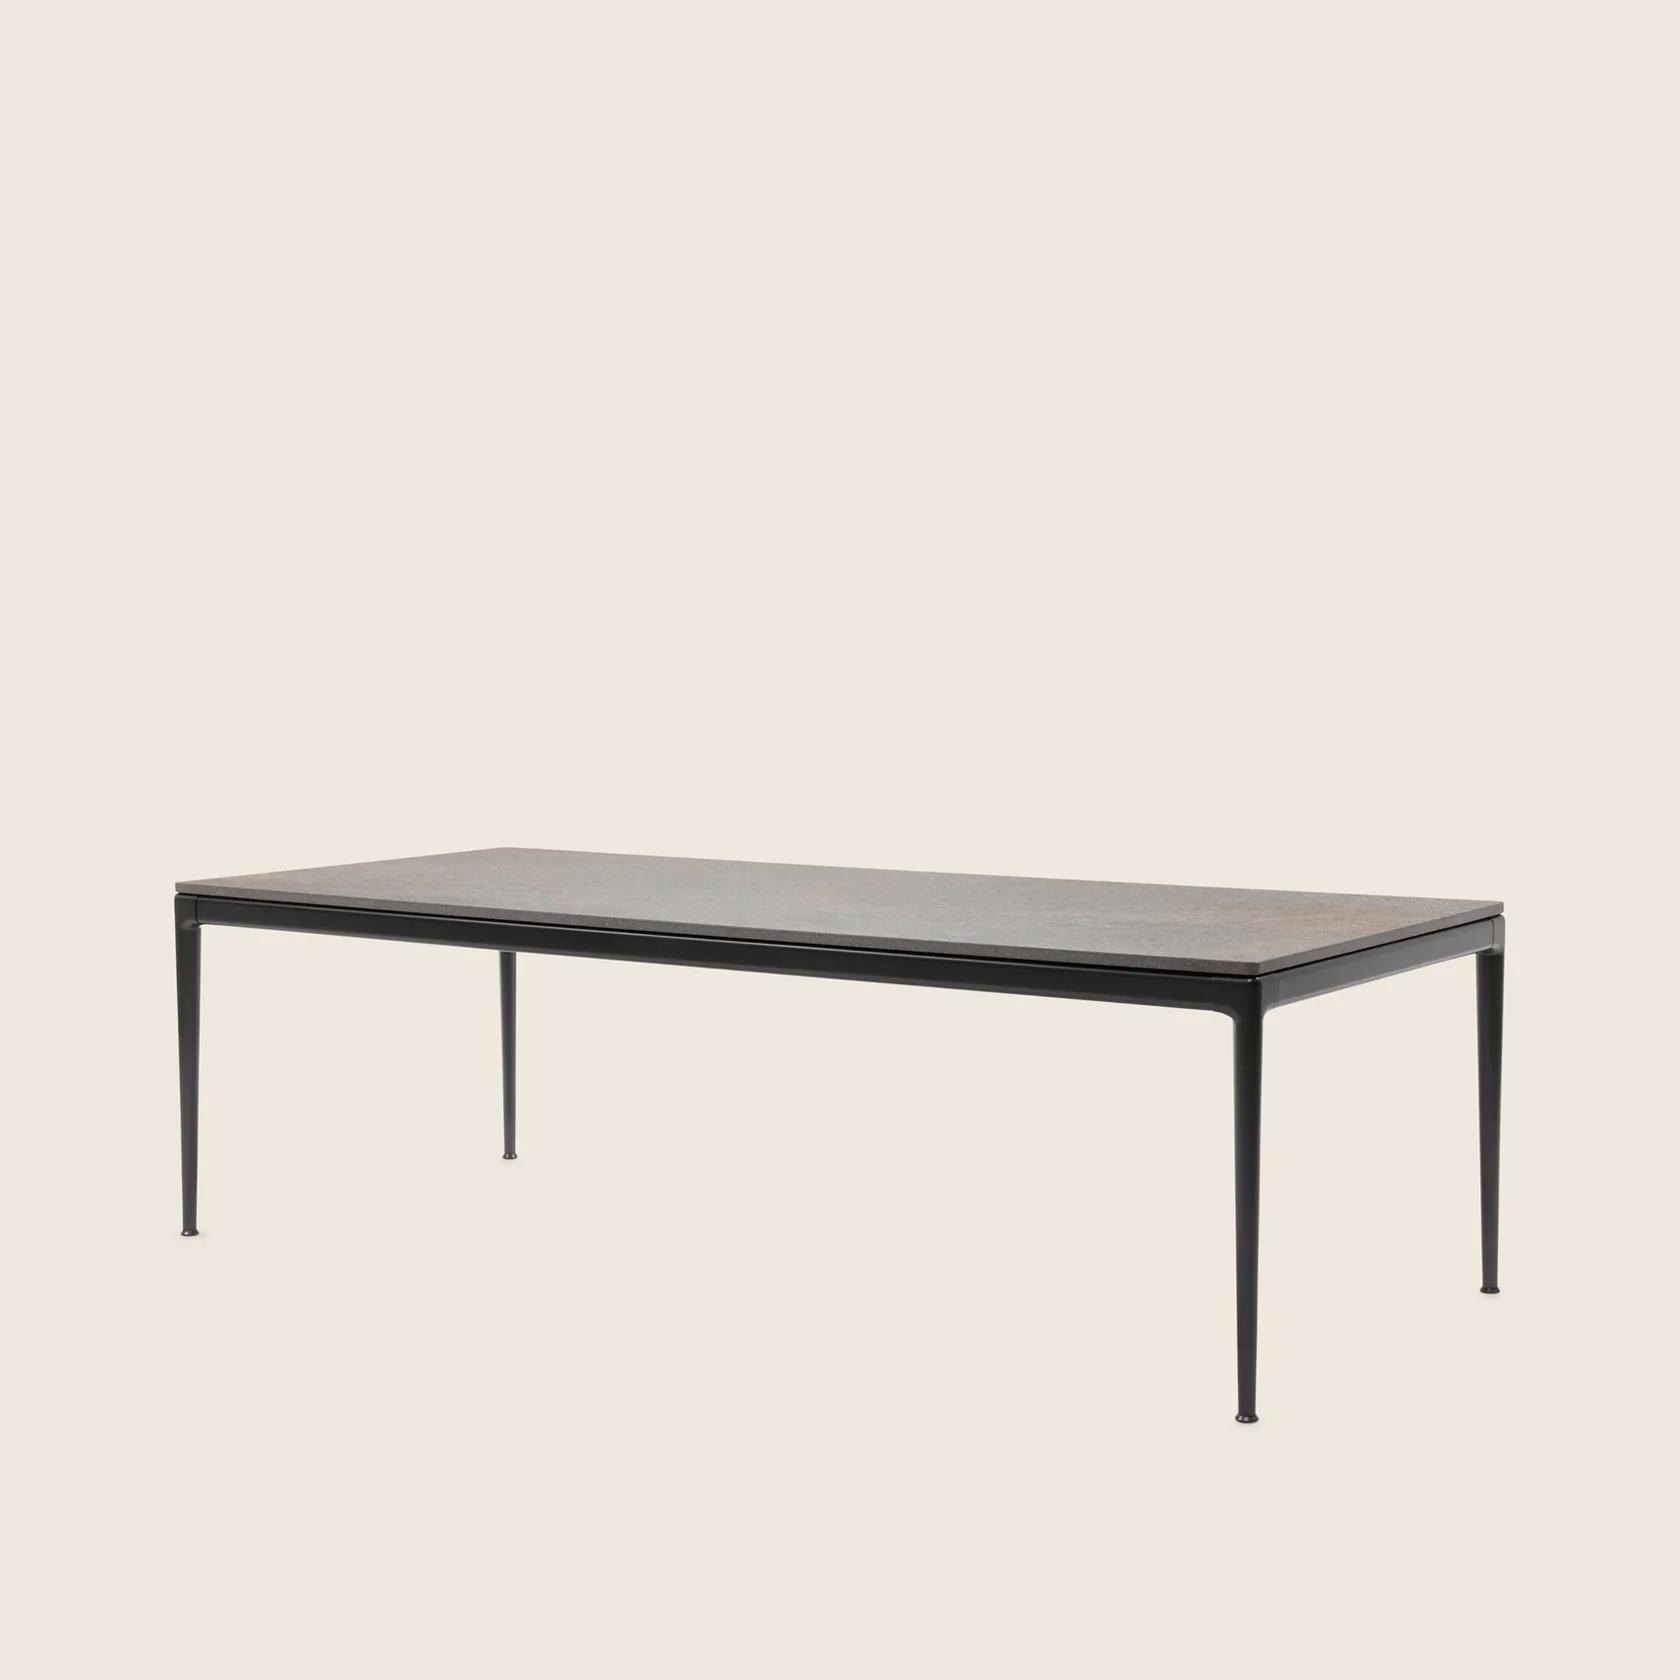 0283L0_PICO OUTDOOR_TABLE_02.png